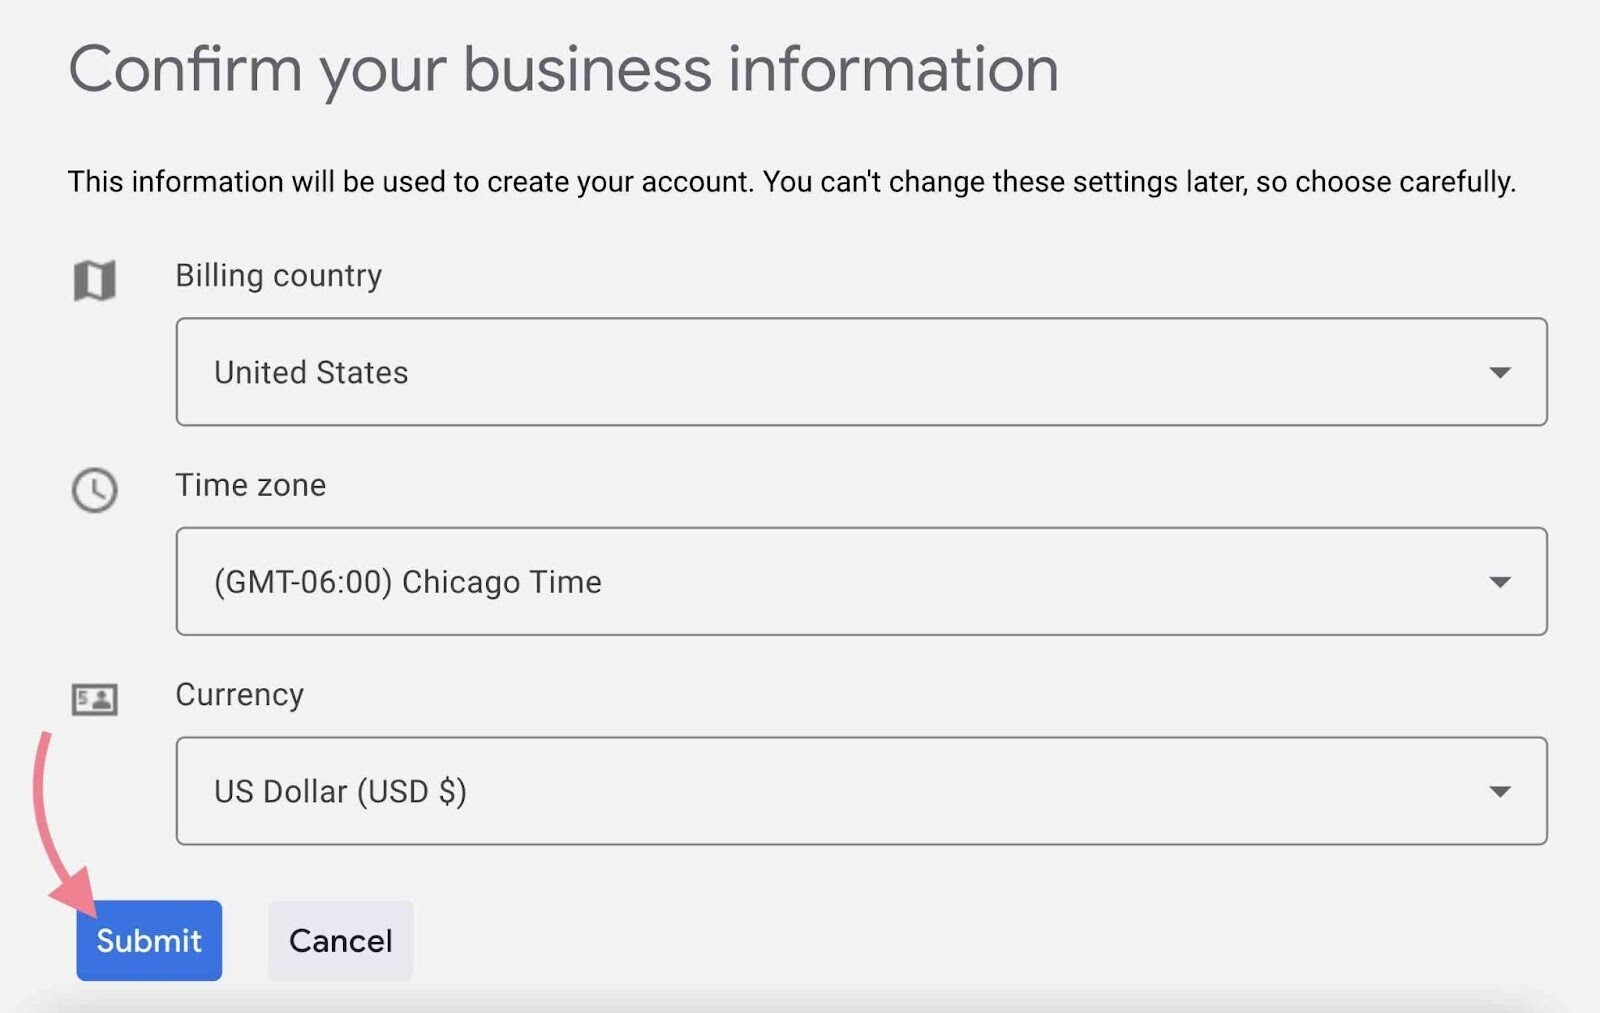 Confirm your business information page